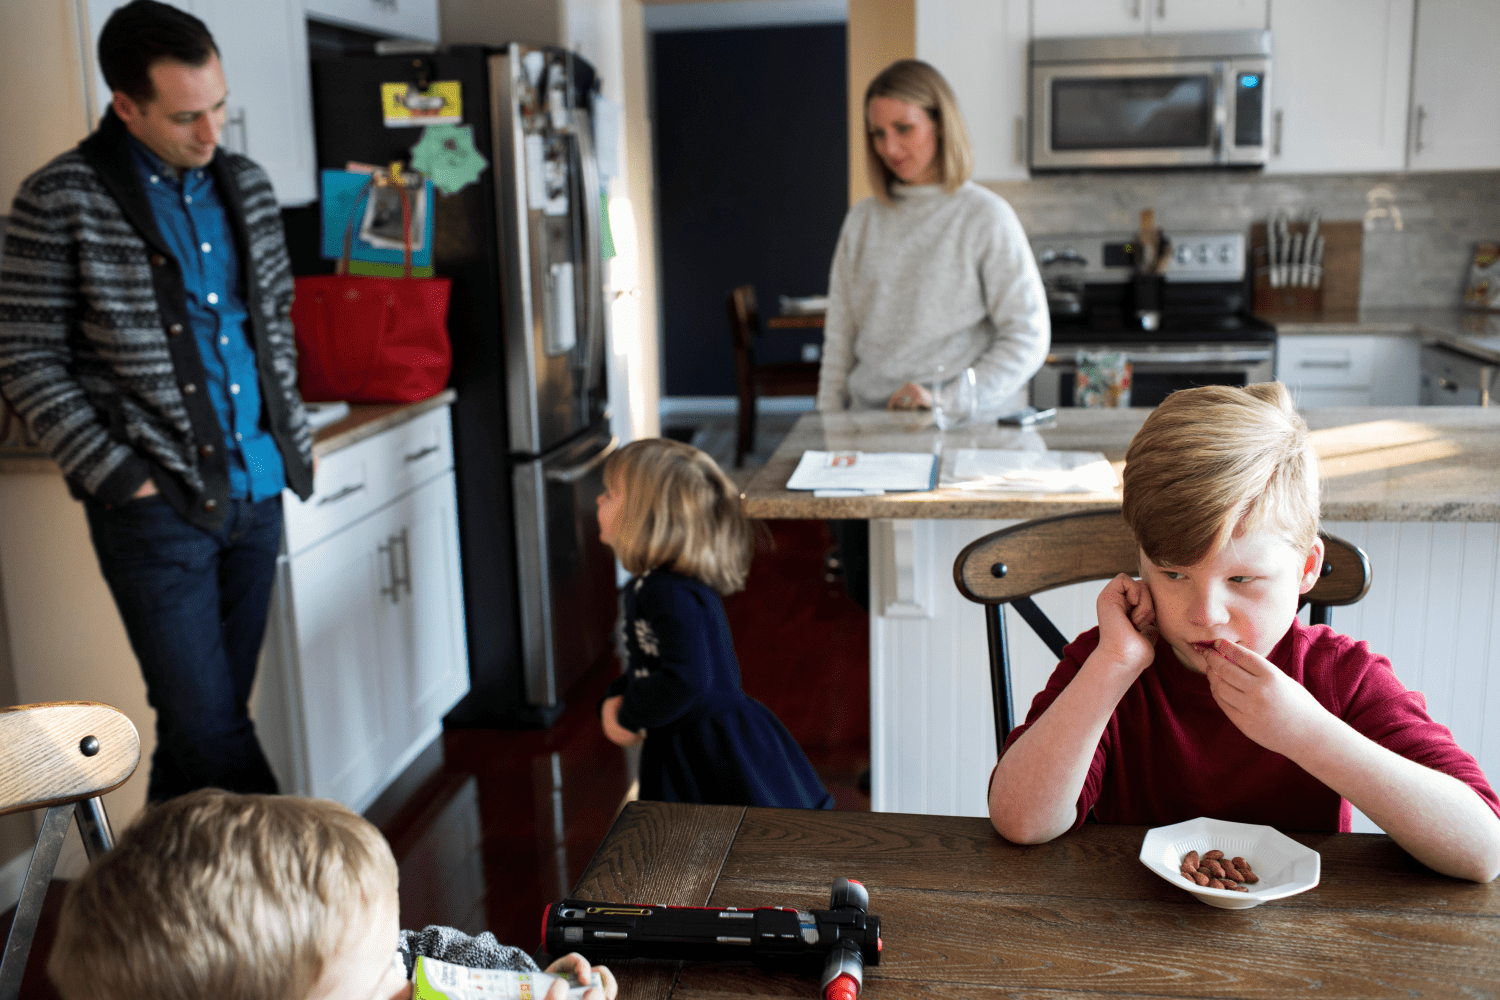 Nobel Lett (R), who suffers from Prader-Willi Syndrome and is treated under the Children's Health Insurance Program (CHIP), eats a snack with his family after school in his home in Columbus, Ohio, U.S. January 17, 2018. REUTERS/Maddie McGarvey